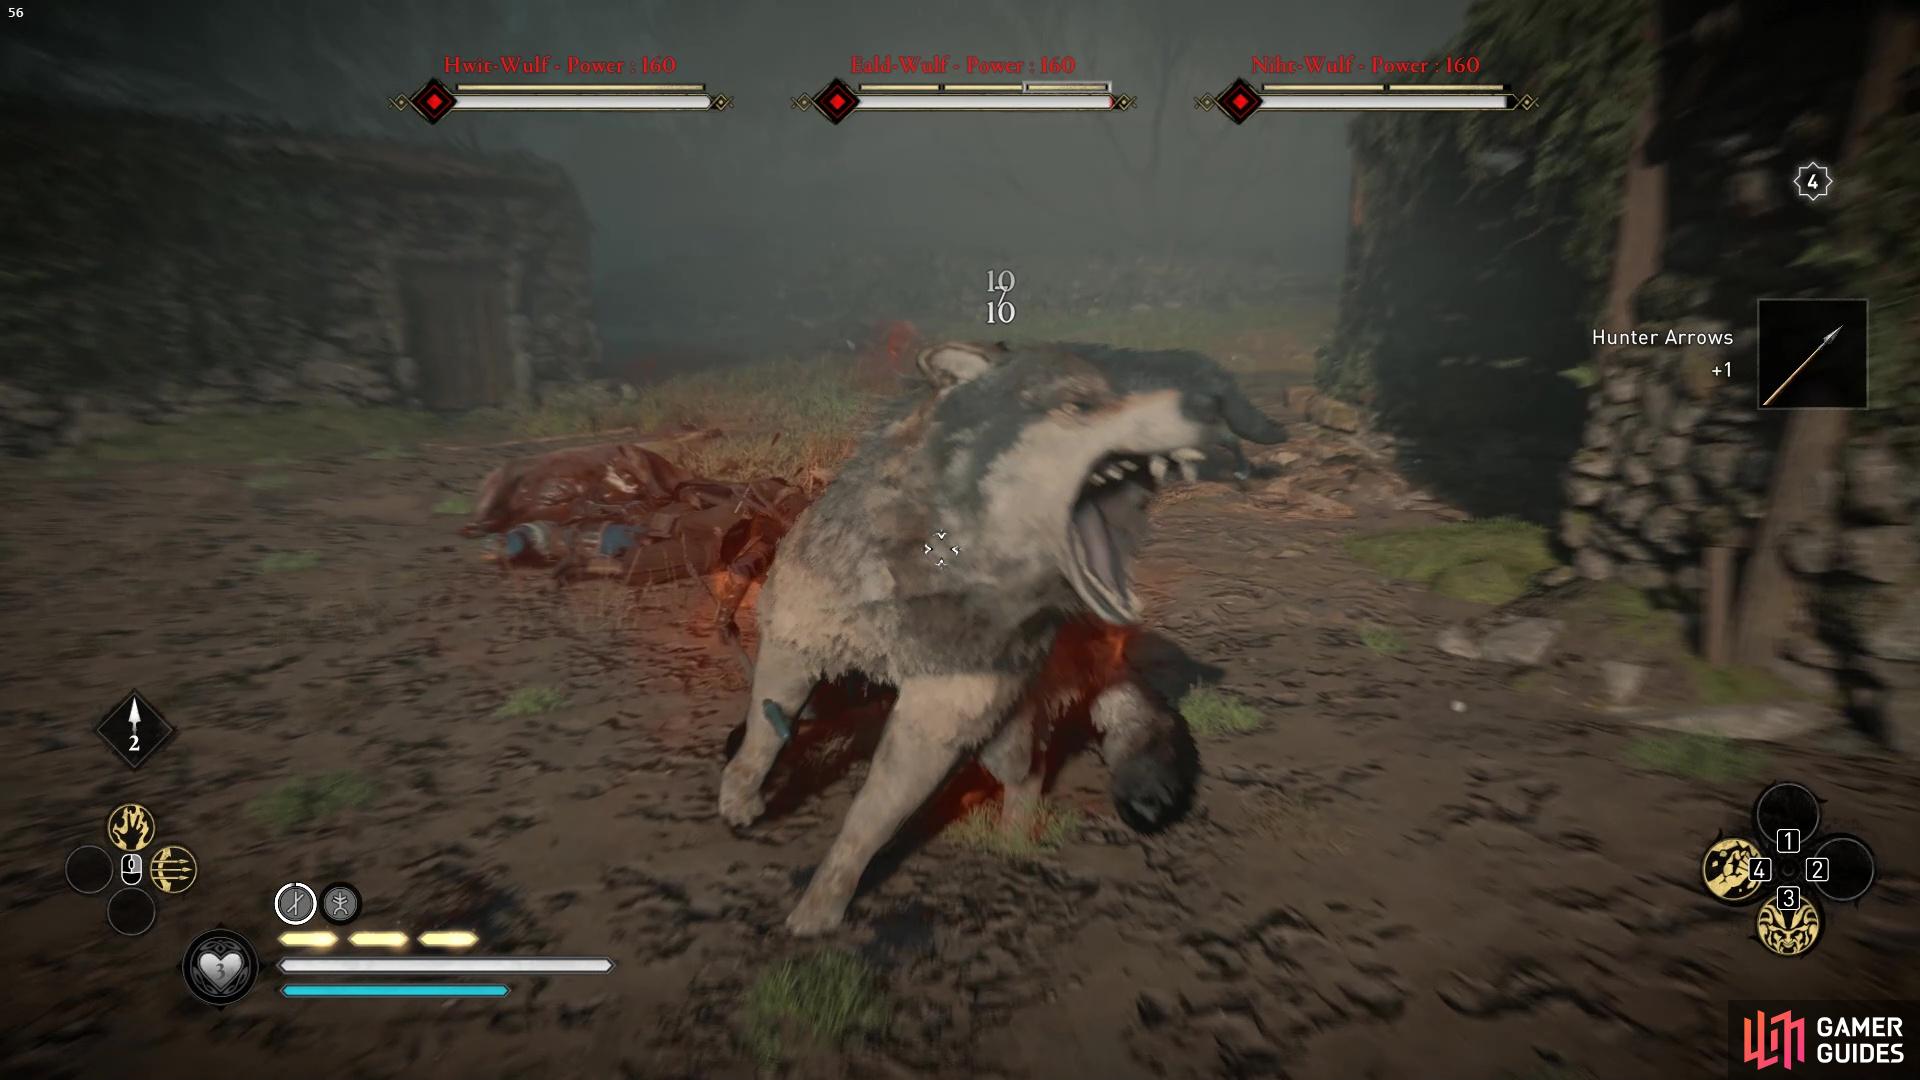 The big brown wolf is tanky but wont bite too hard.